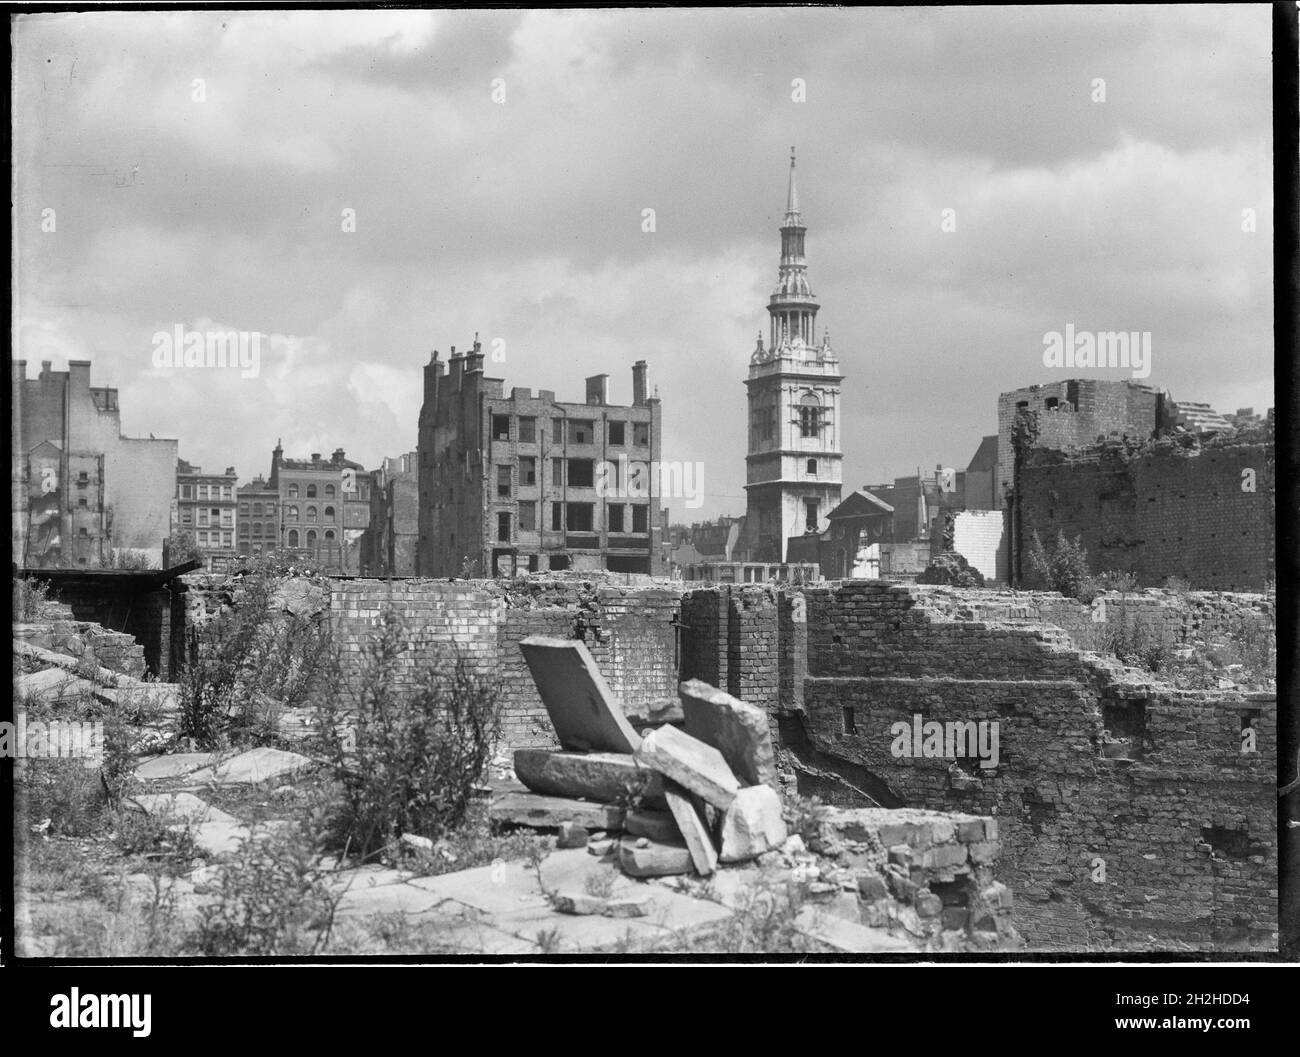 St Mary-le-Bow Church, Cheapside, City and County of the City of London, Greater London Authority, 1941-1945. A view looking north-east across a bomb damaged landscape towards St Mary-le-Bow Church. St Mary-le-Bow was rebuilt by Christopher Wren after the Great Fire of London in 1666. During the Second World War it was almost destroyed by bombing on 10th May 1941 with incendiary bombs causing a fire which sent the bells in its tower crashing down to the ground. The tower was left standing and restoration of the church began in 1956. Stock Photo